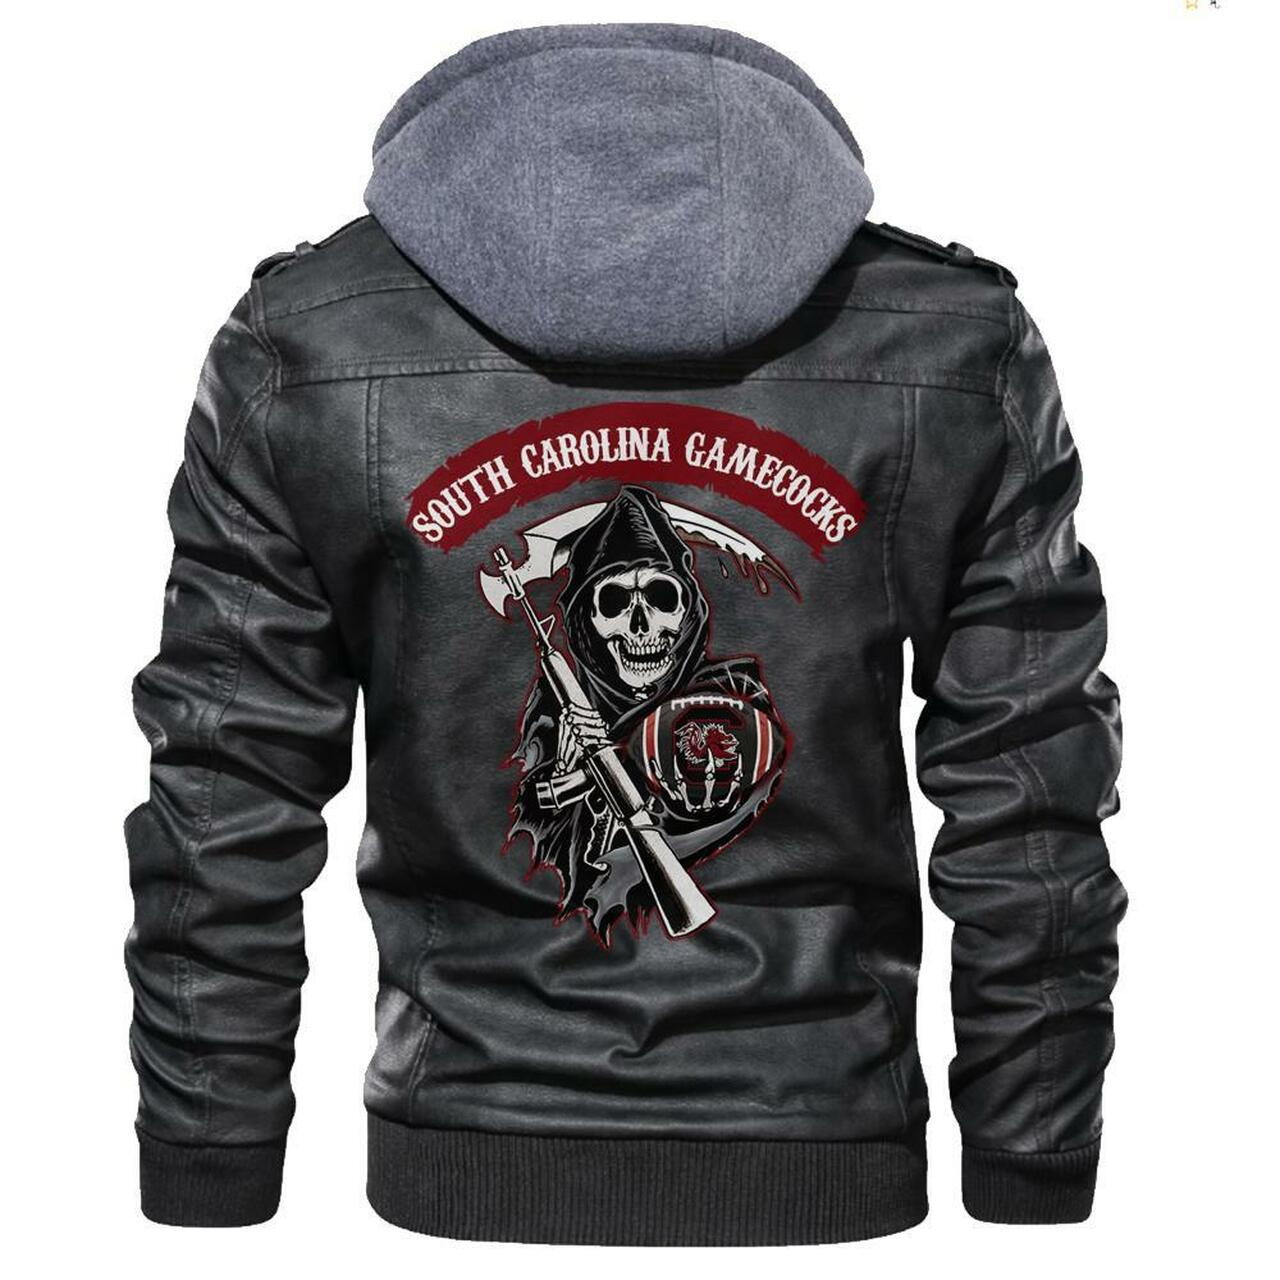 Our store has all of the latest leather jacket 99